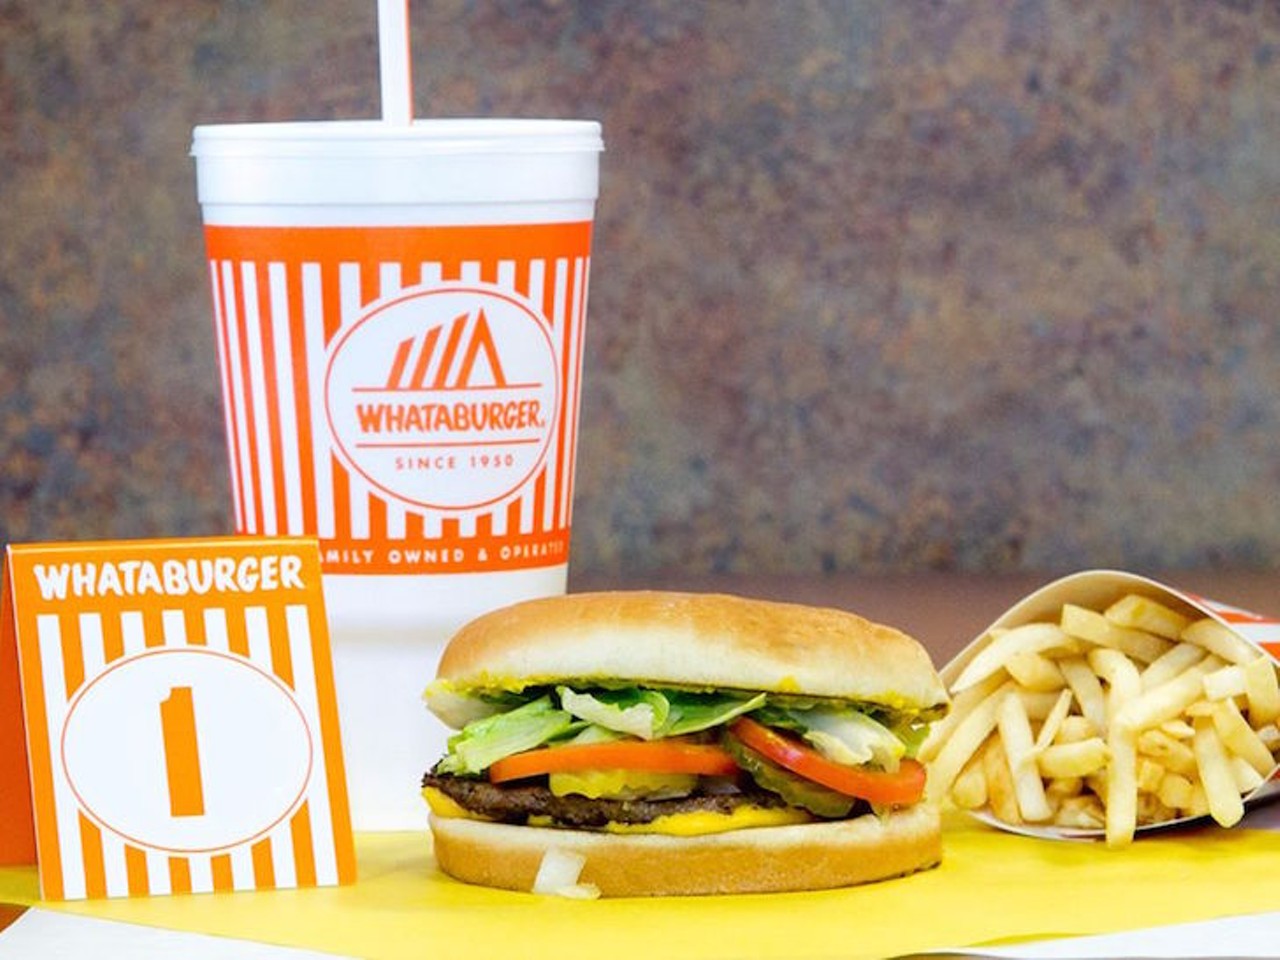 Throw caution to the wind
Barbacoa and Big Red. Whataburger and Coke. McDonalds nuggets and orange soda. Yikes! This all sounds so gross. 1000mg ibuprofen lots of water and sleep, then shower and sleep more.
&#151;Mary-Elizabeth Martinez, account executive
Photo via Whataburger/Facebook